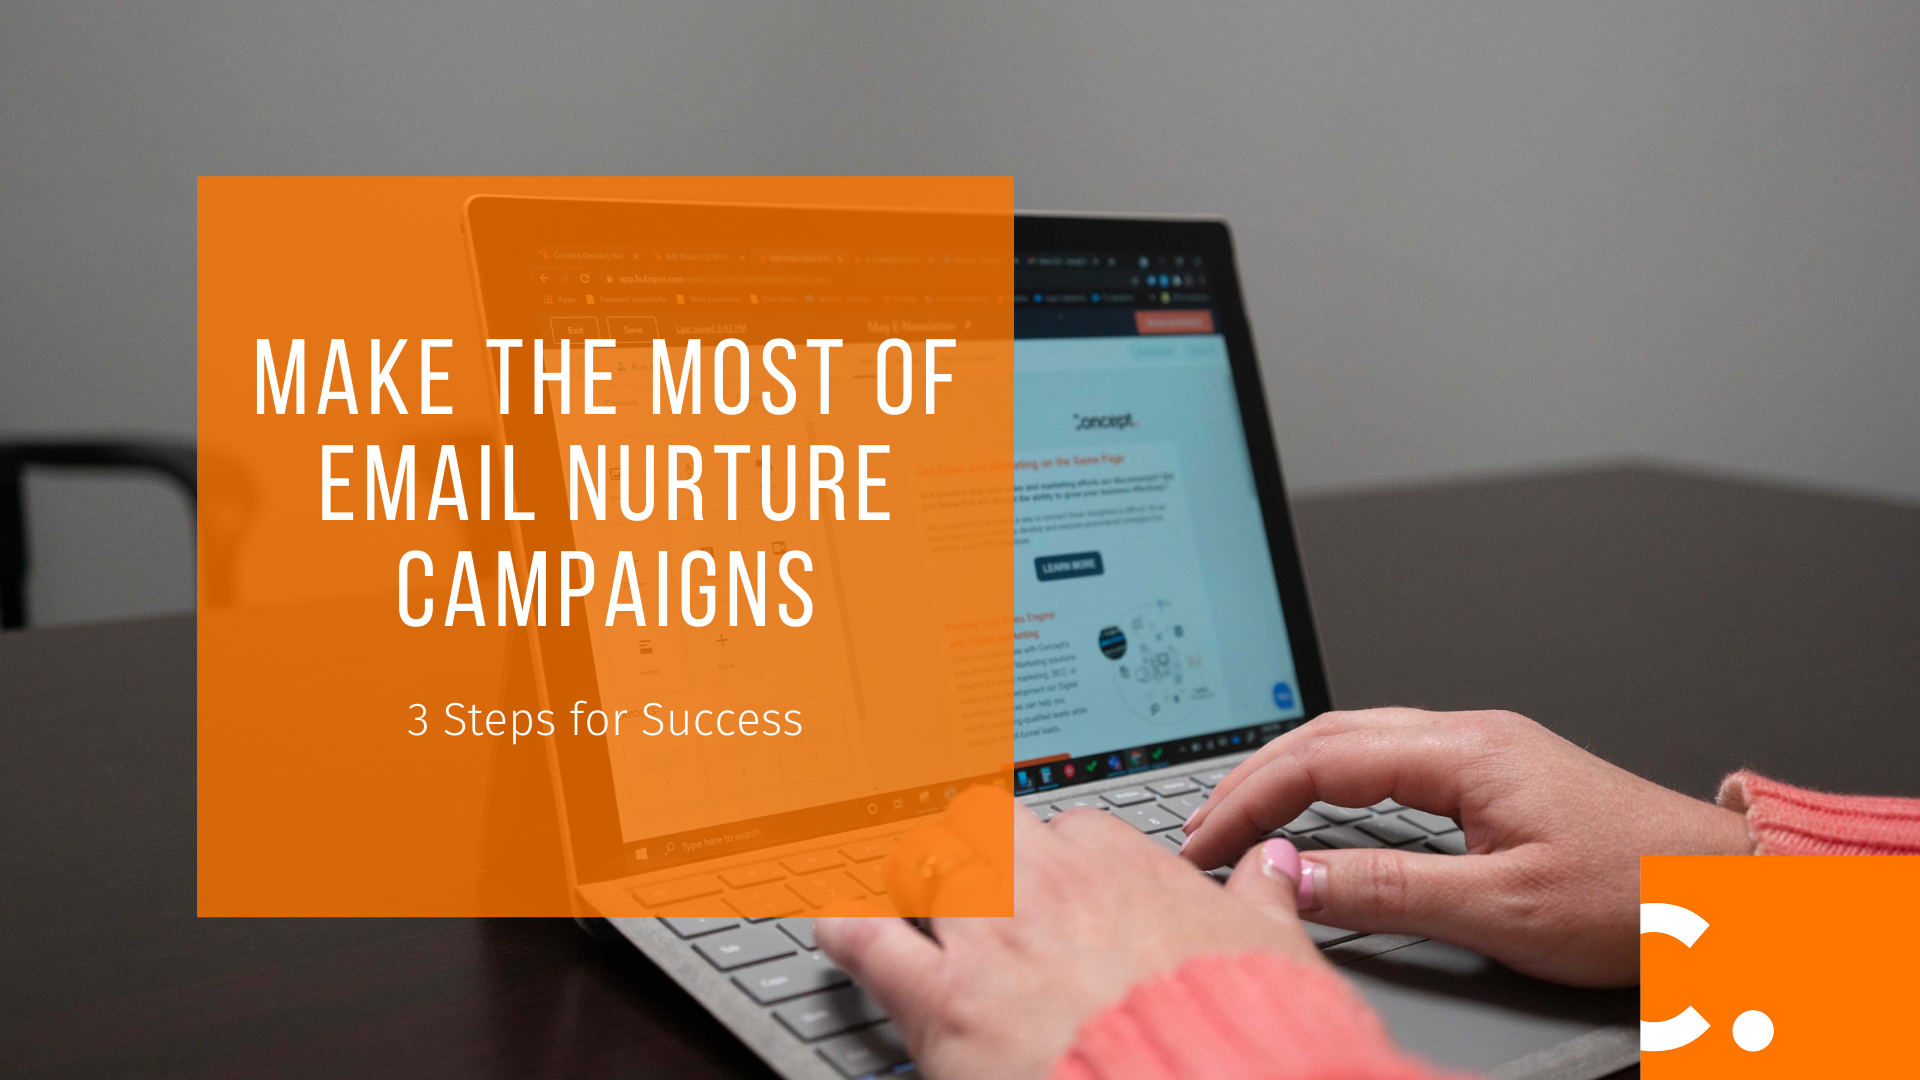 Email nurture campaigns are a key part to sales pipeline development